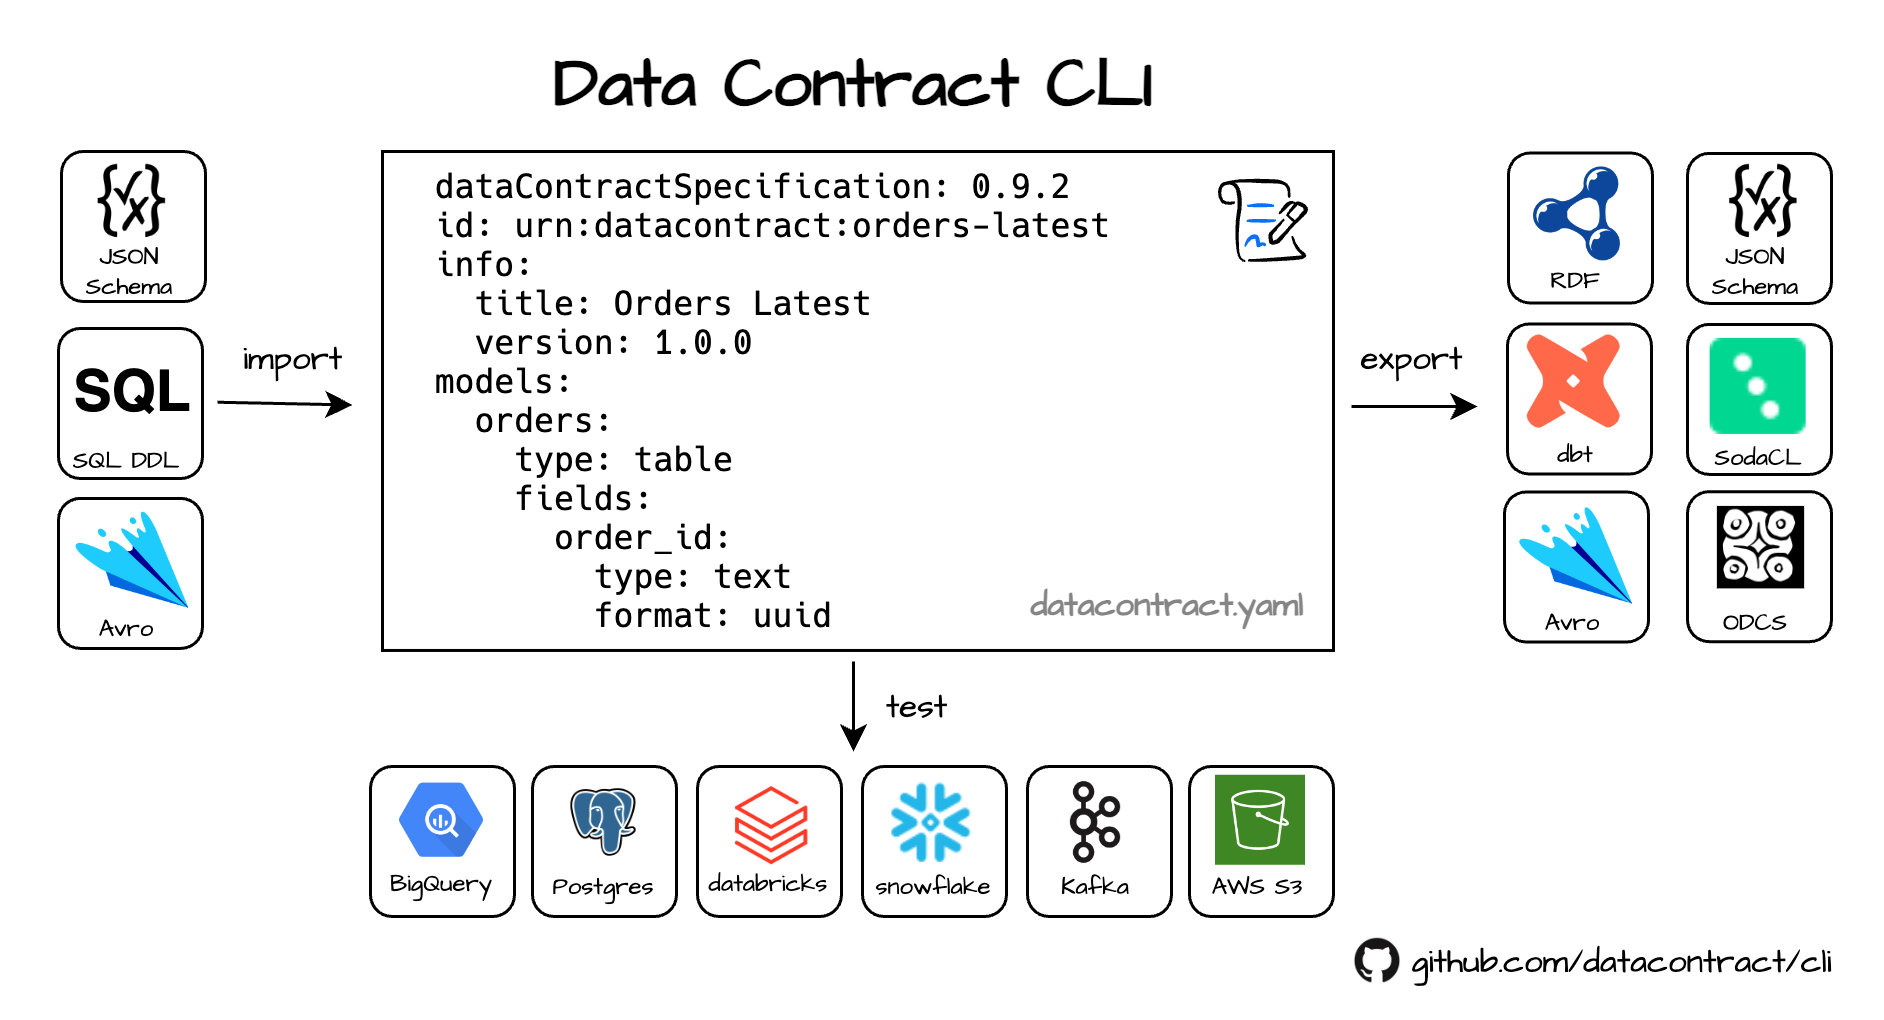 Main features of the Data Contract CLI